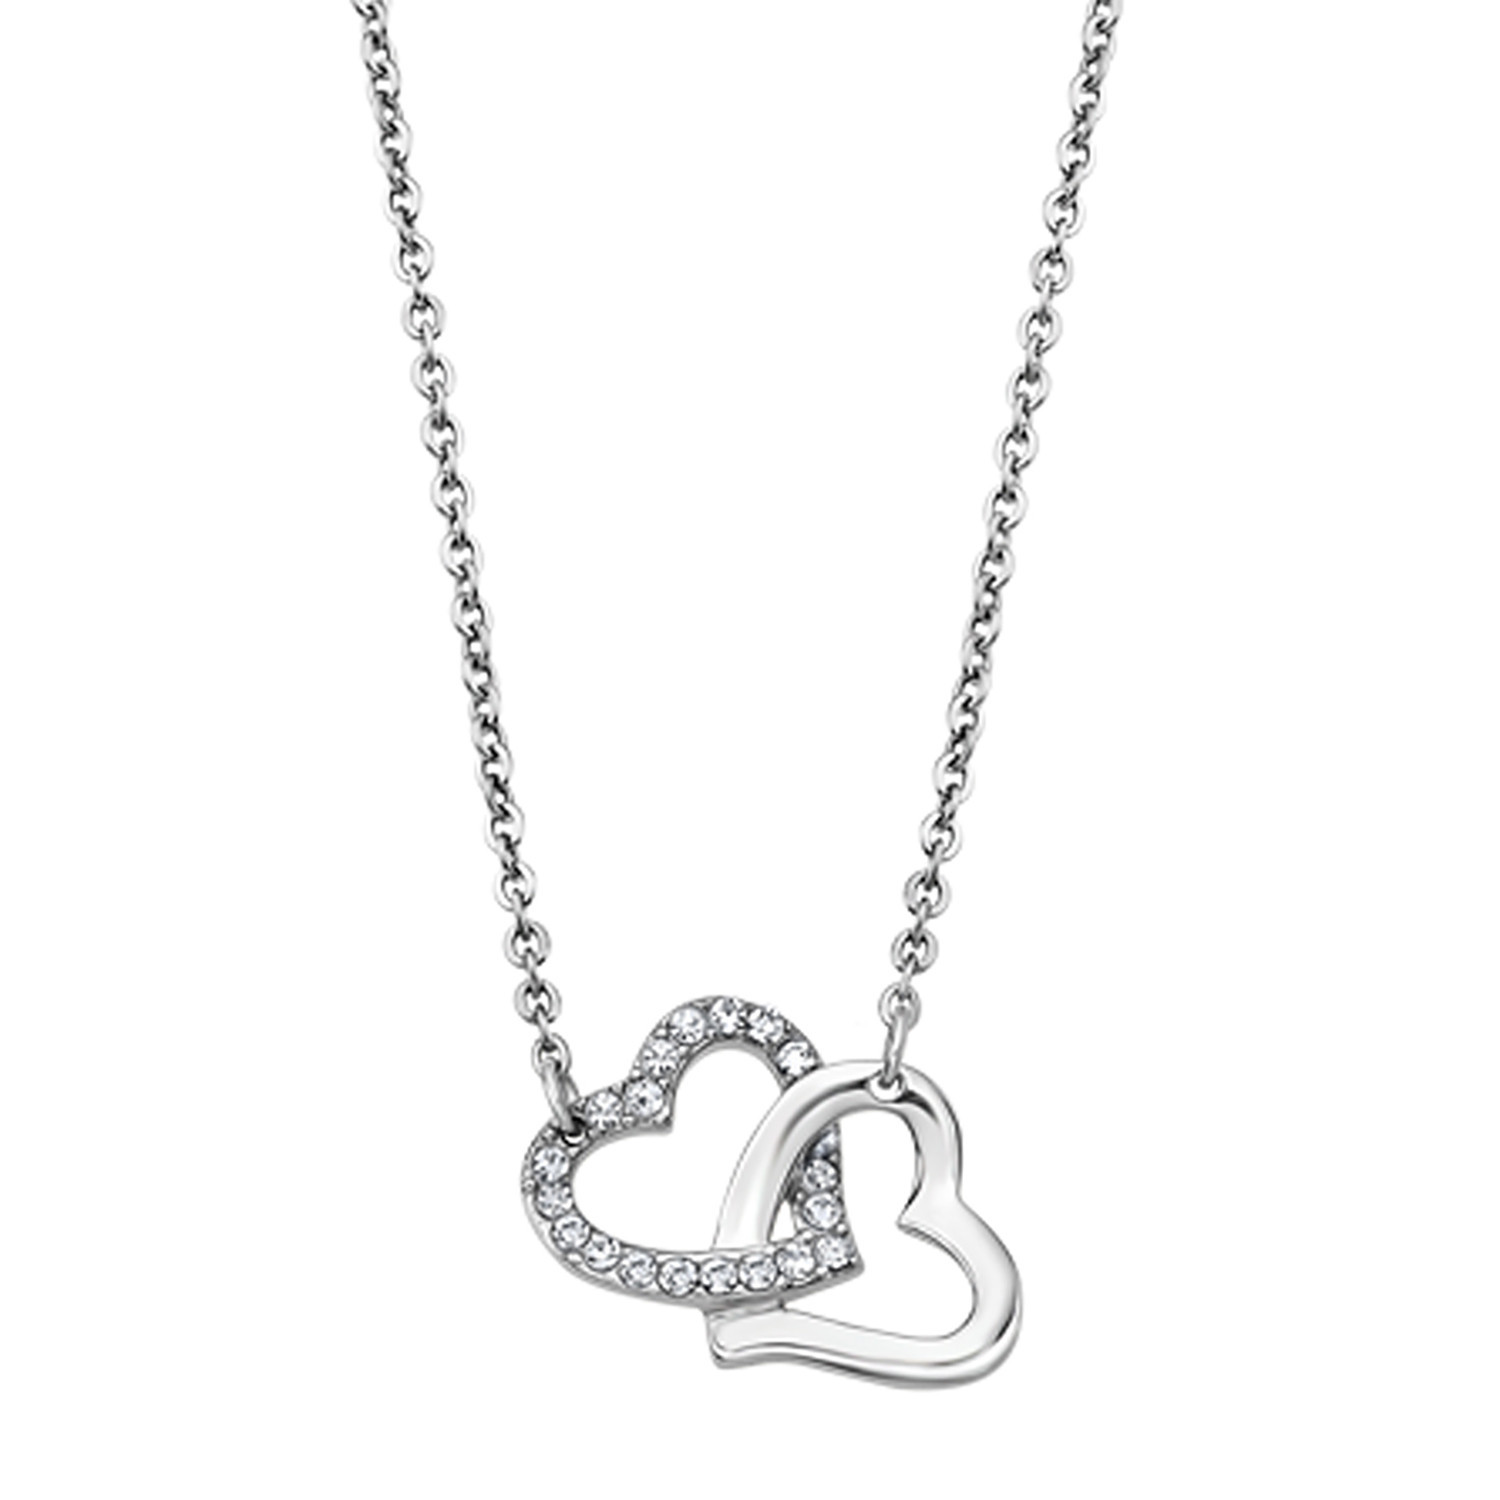 Collier Lotus Collection Woman's Heart Coeur